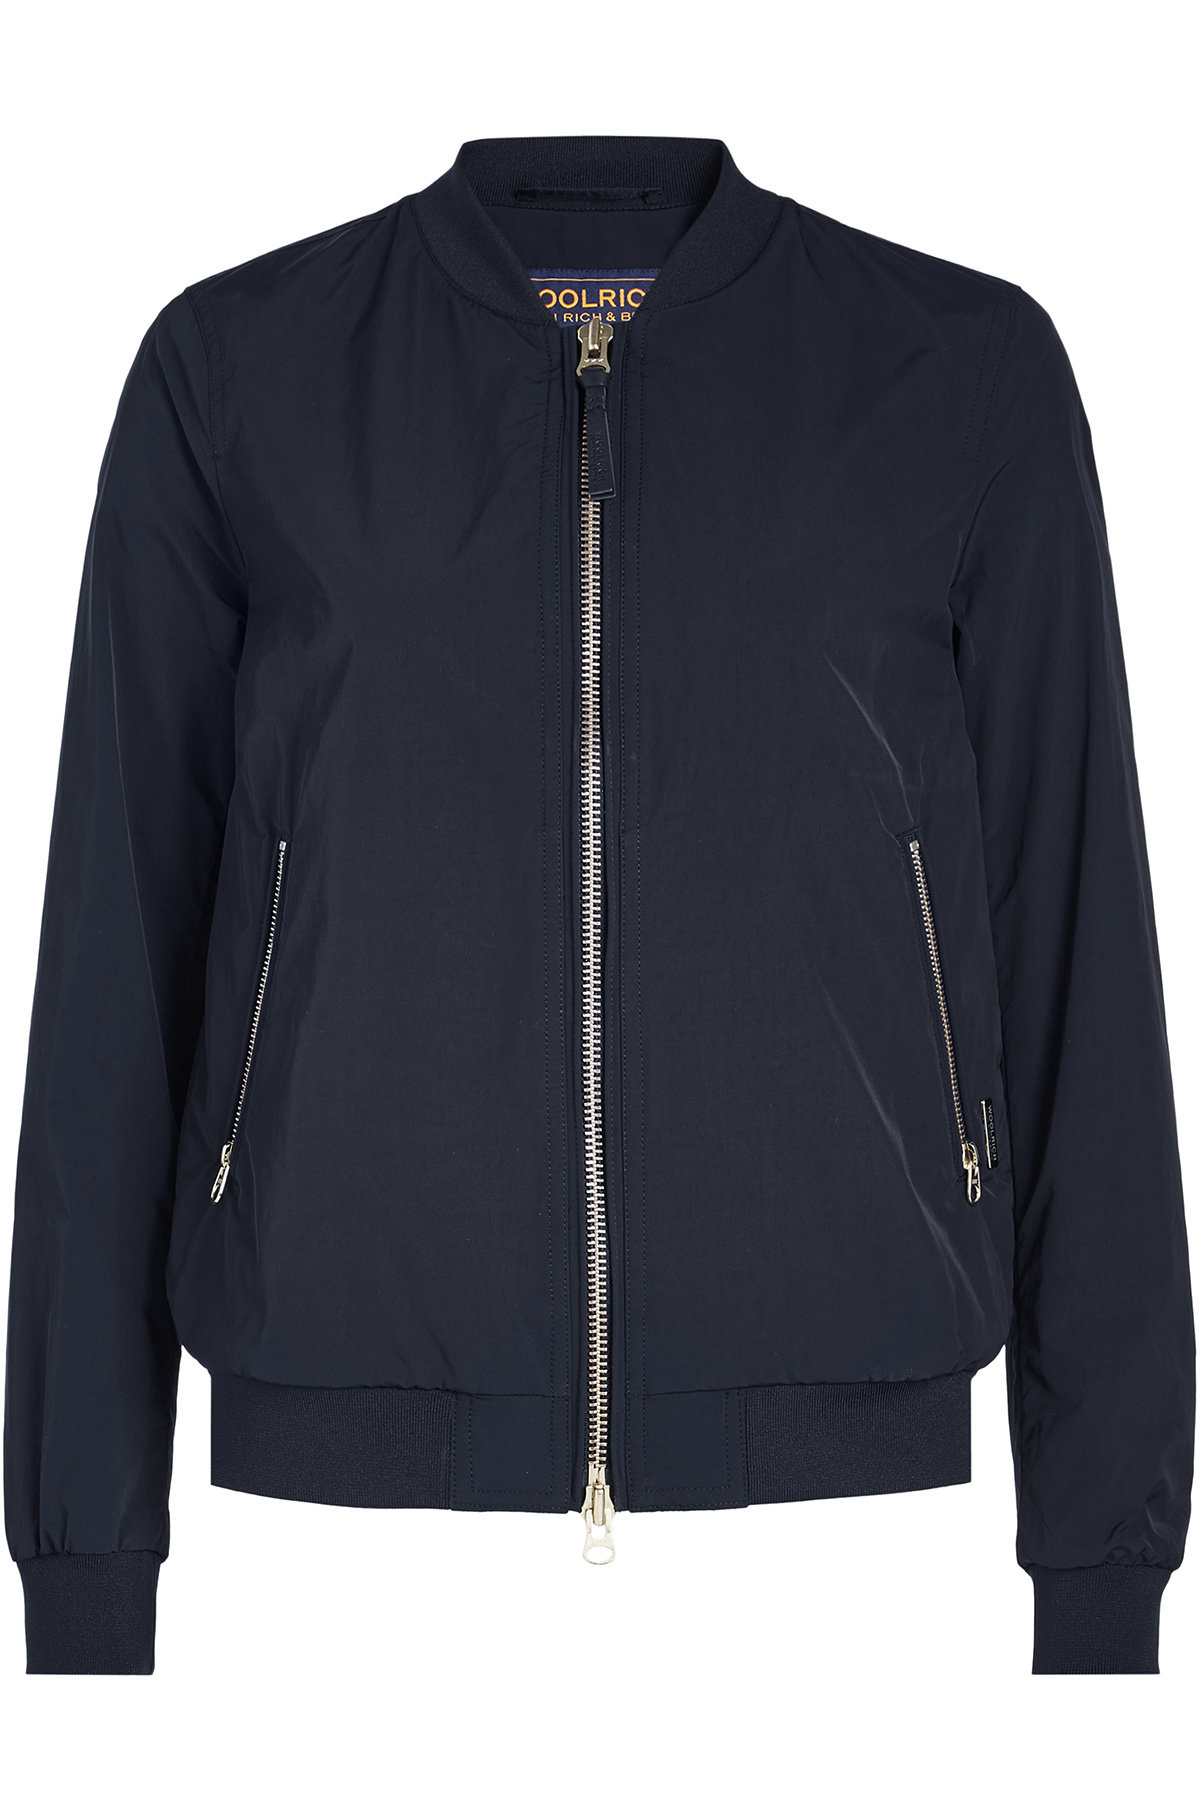 Charlotte Bomber Jacket by Woolrich